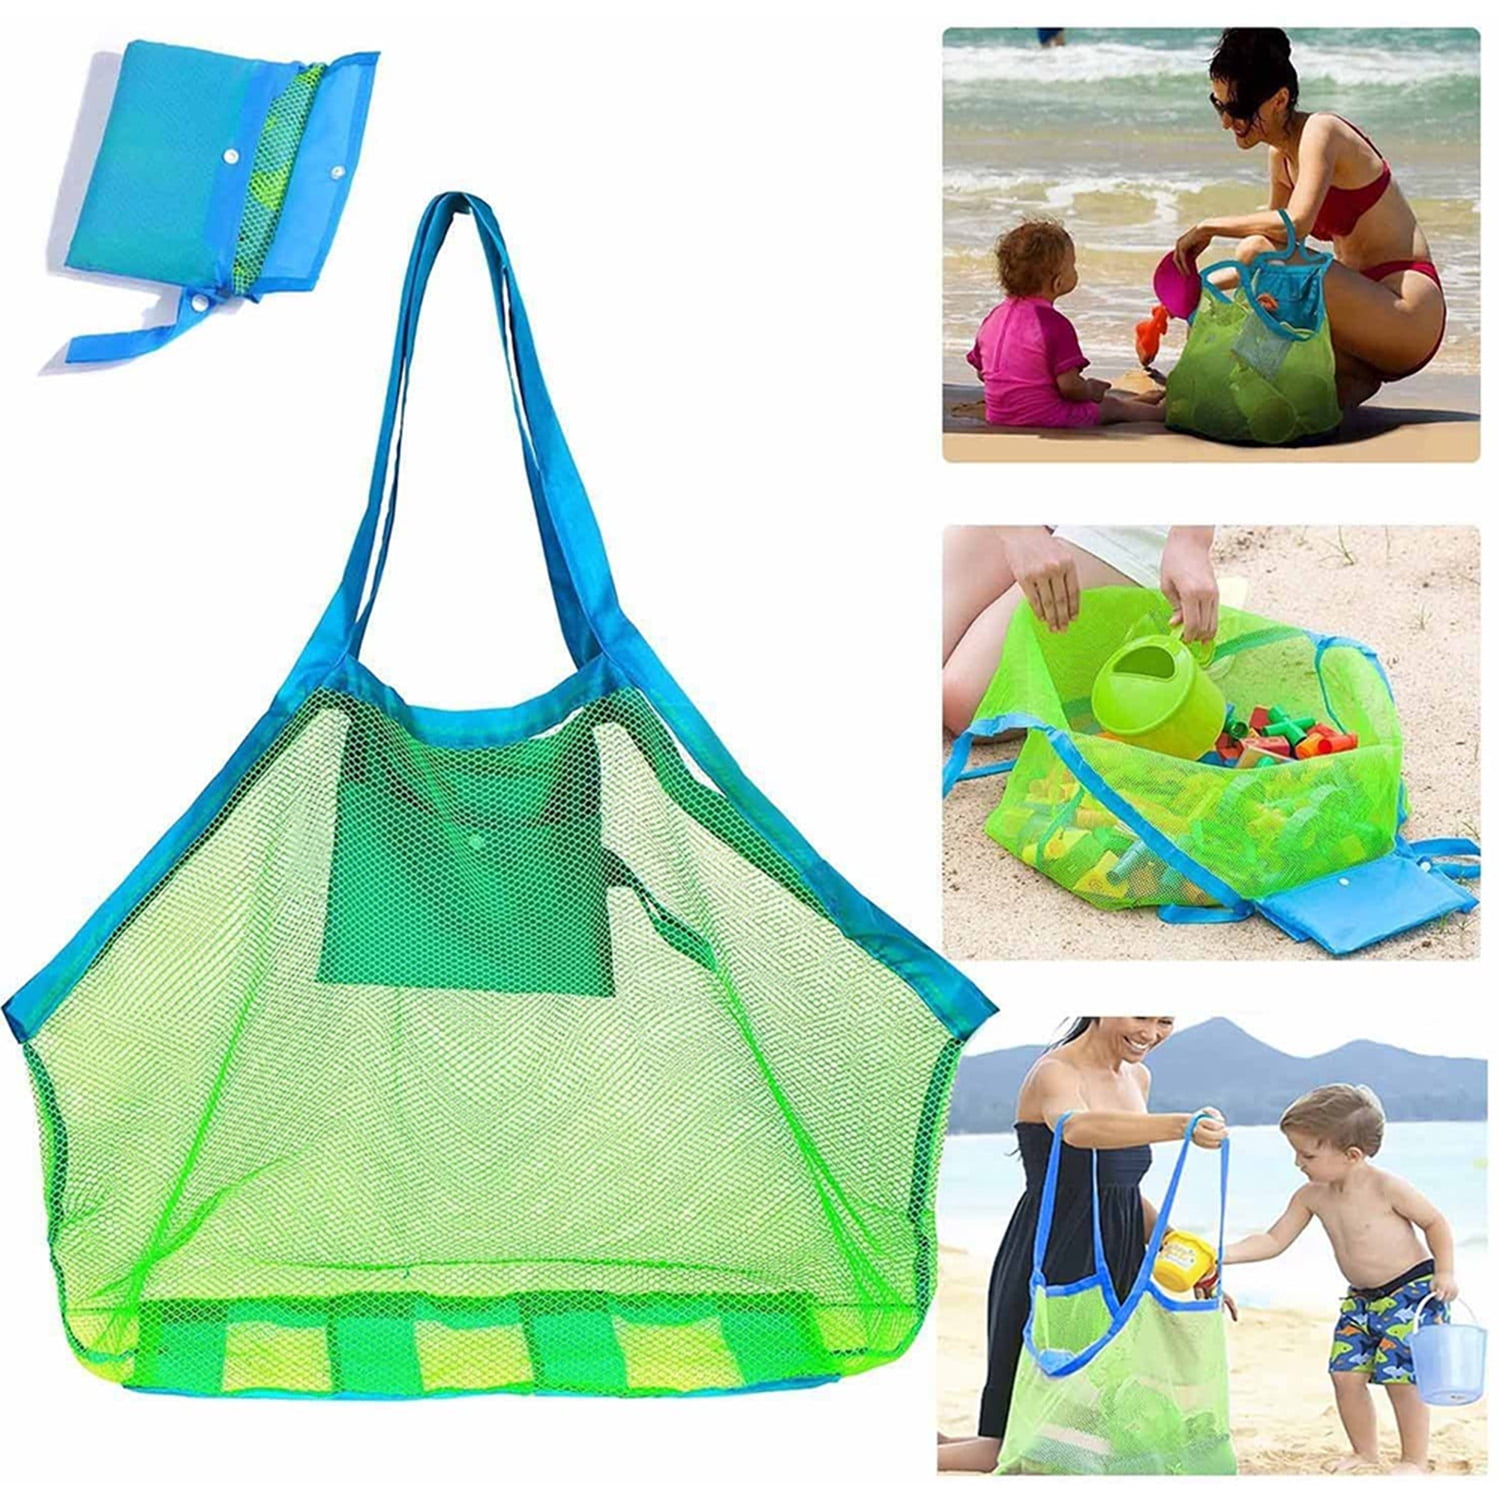 Outdoor Travel Bag with 4 Sand Shovel Scoops for Beach Play Toy Seashell Tote Bags NAA 4 PCS Beach Toy Mesh Bags for Kids 